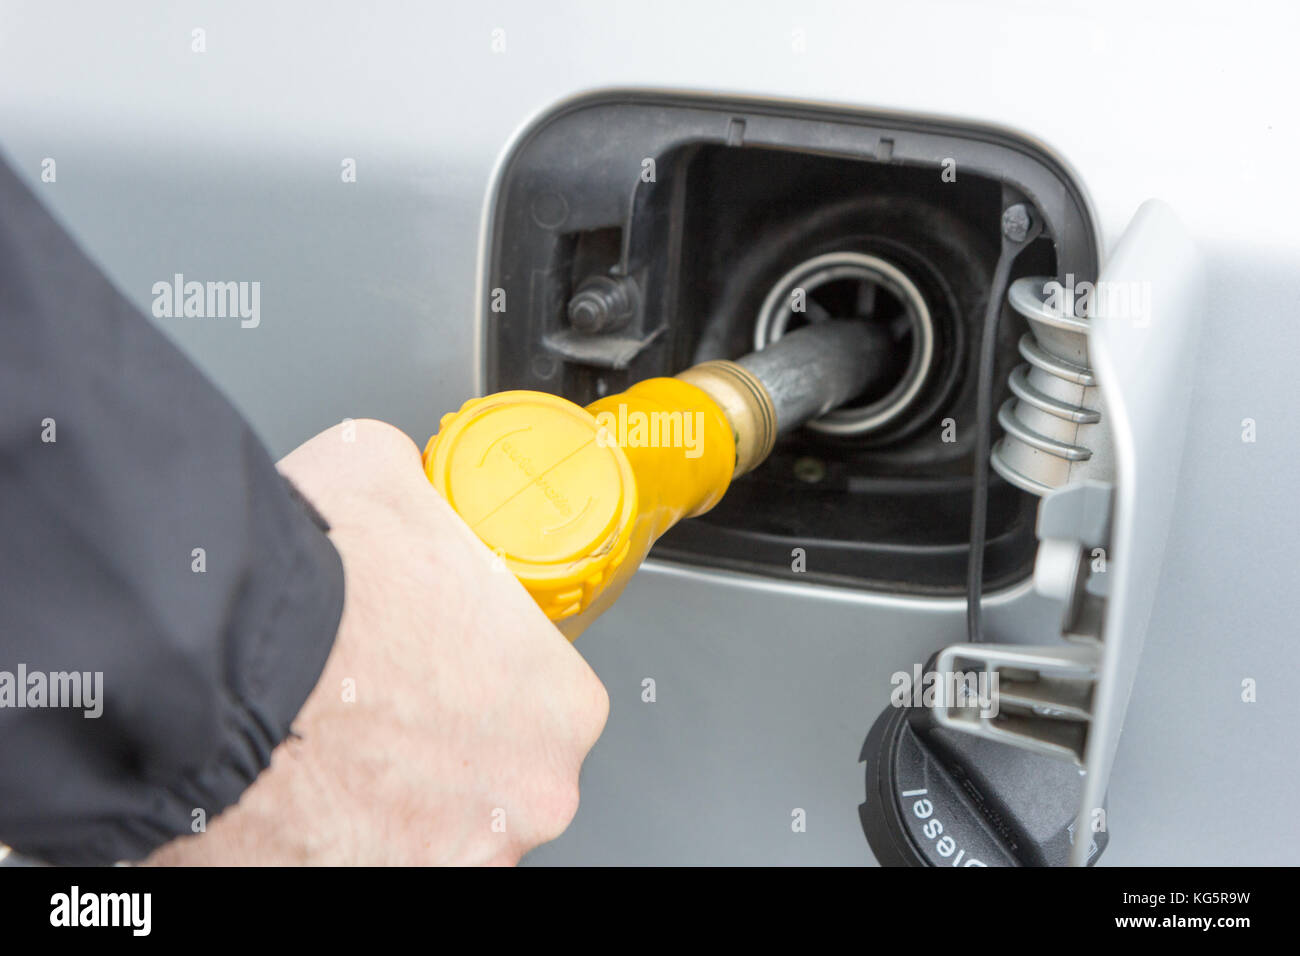 Valenciennes, France. 19 March 2017. A man holding a yellow filling nozzle (gun) and is filling gas to a car. Stock Photo